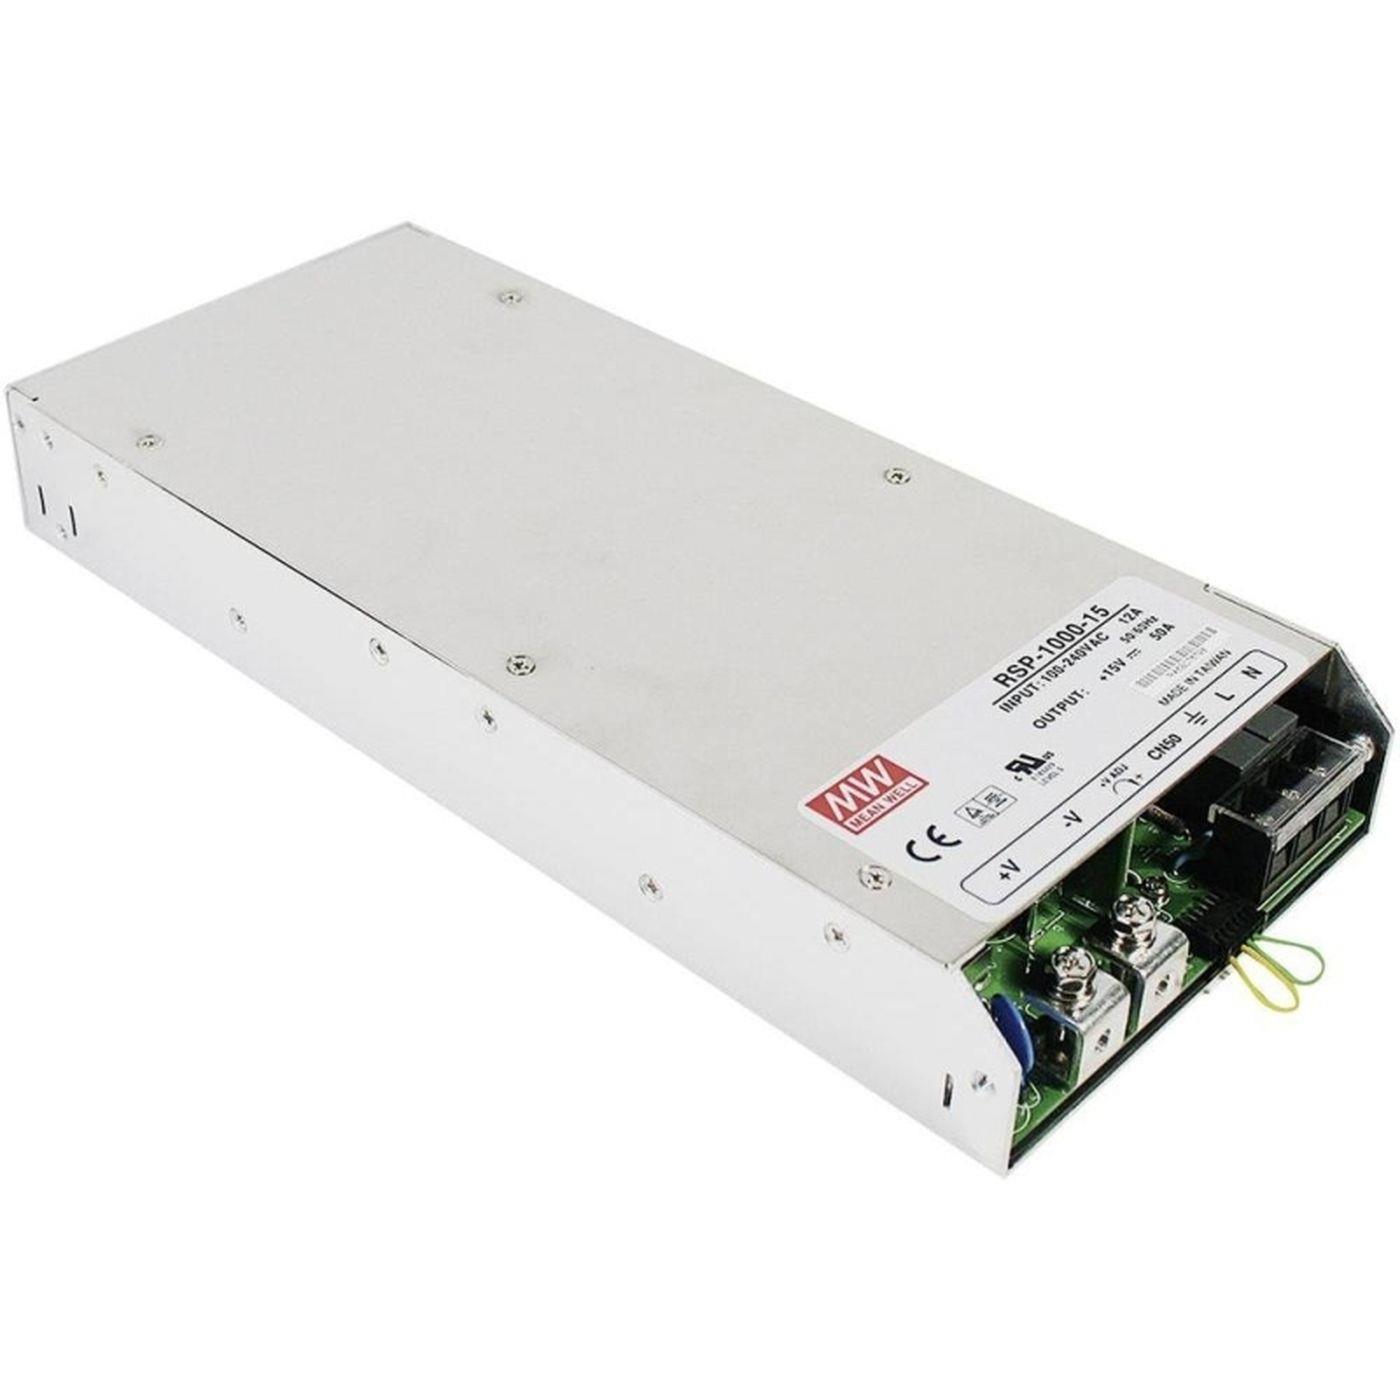 RSP-1000-24 960W 24V 40A Industrial power supply